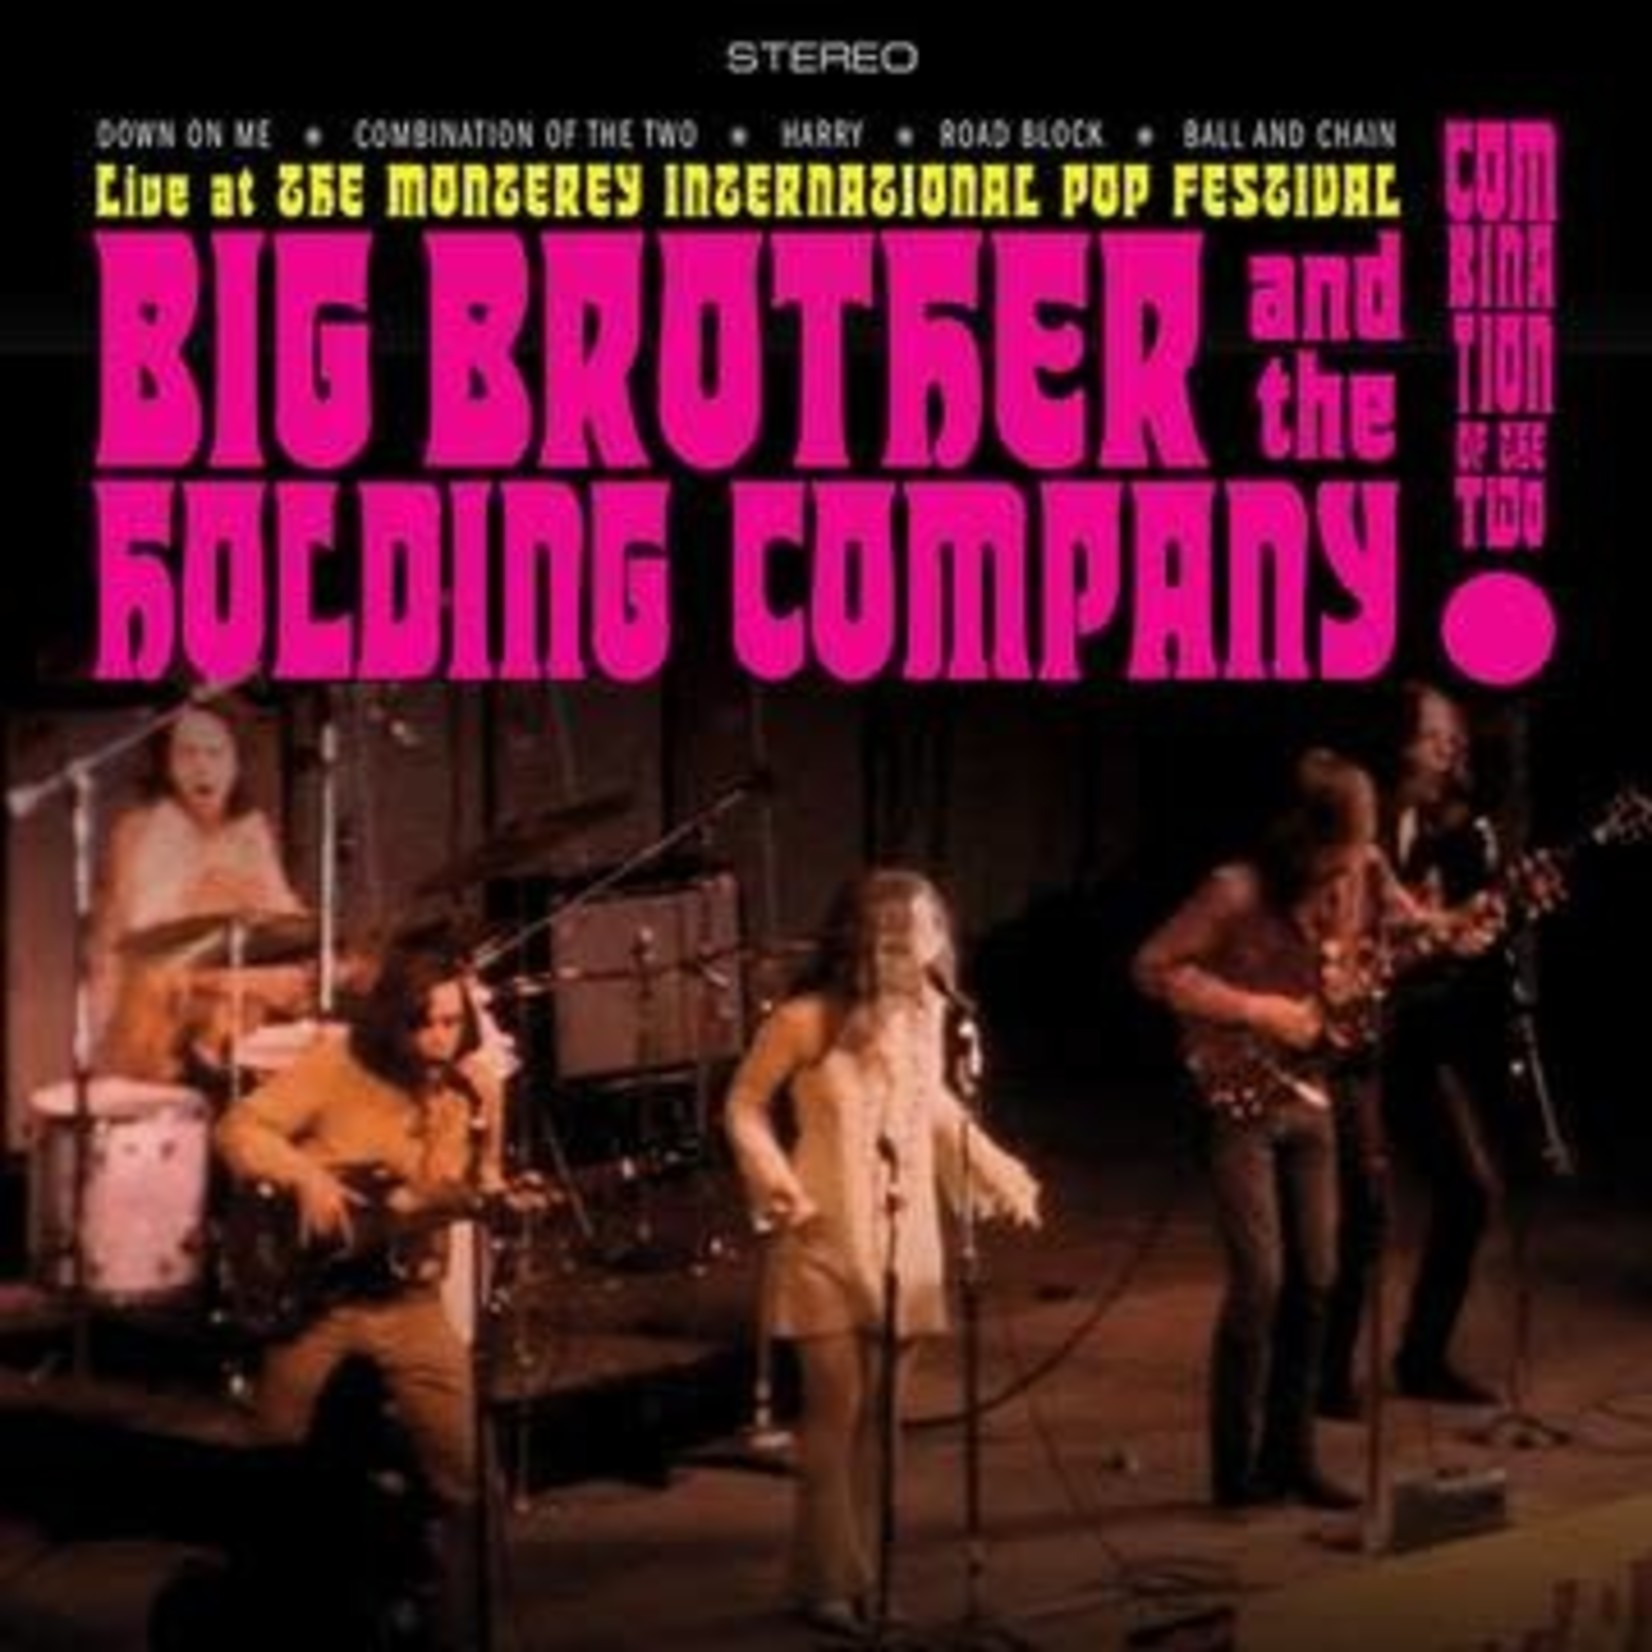 RSD Black Friday 2011-2022 Big Brother & The Holding Company - Combination of the Two: Live at the Monterey International Pop Festval (LP) [Monterey-Purple]